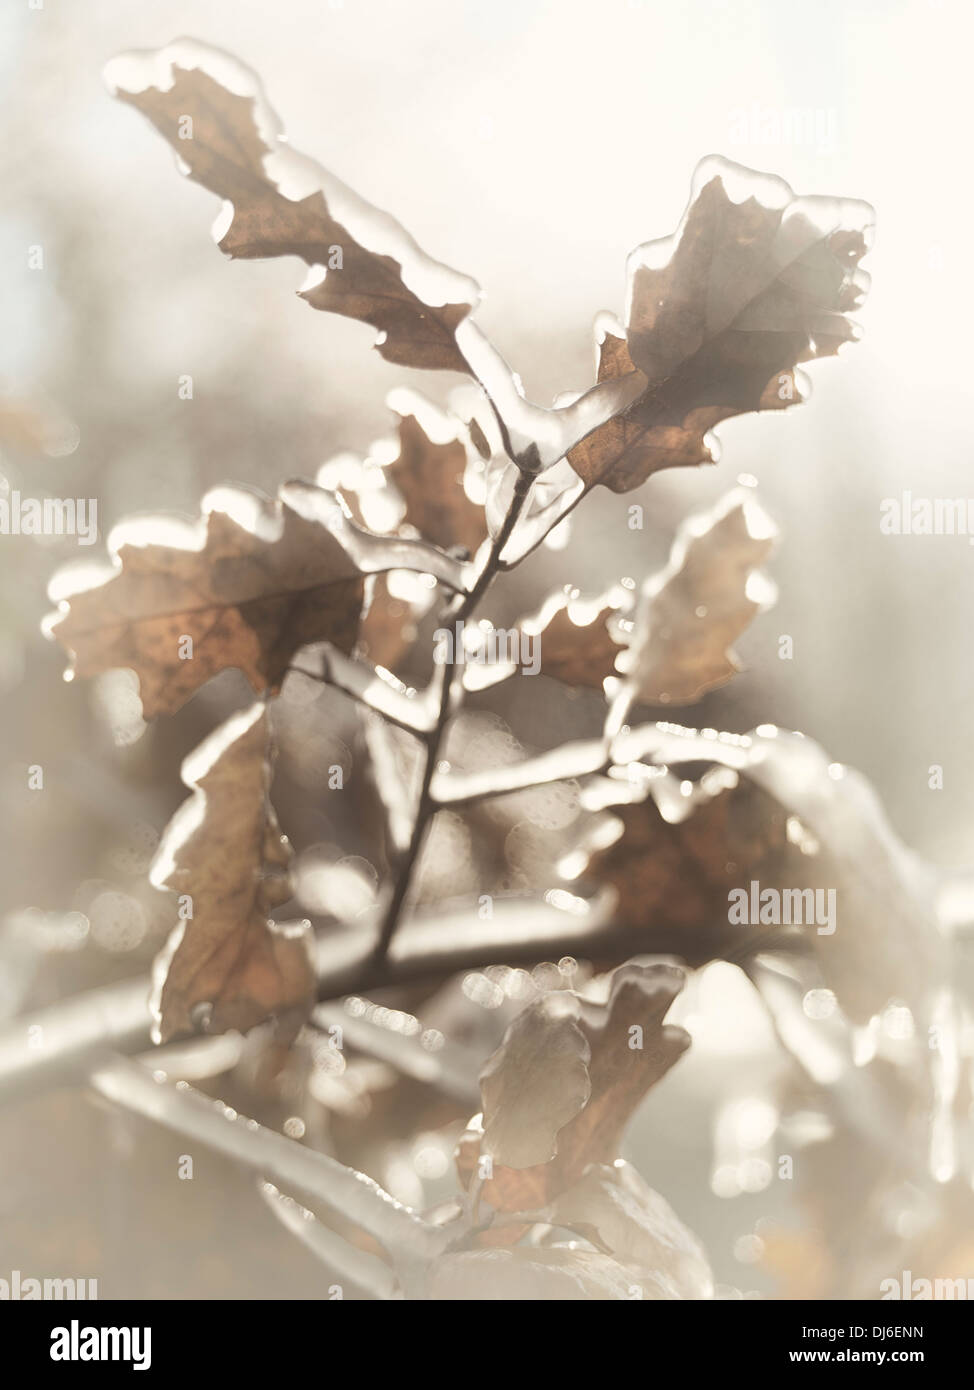 Frozen branch of oak tree with leaves covered with ice. Artistic abstract fall nature closeup. Stock Photo